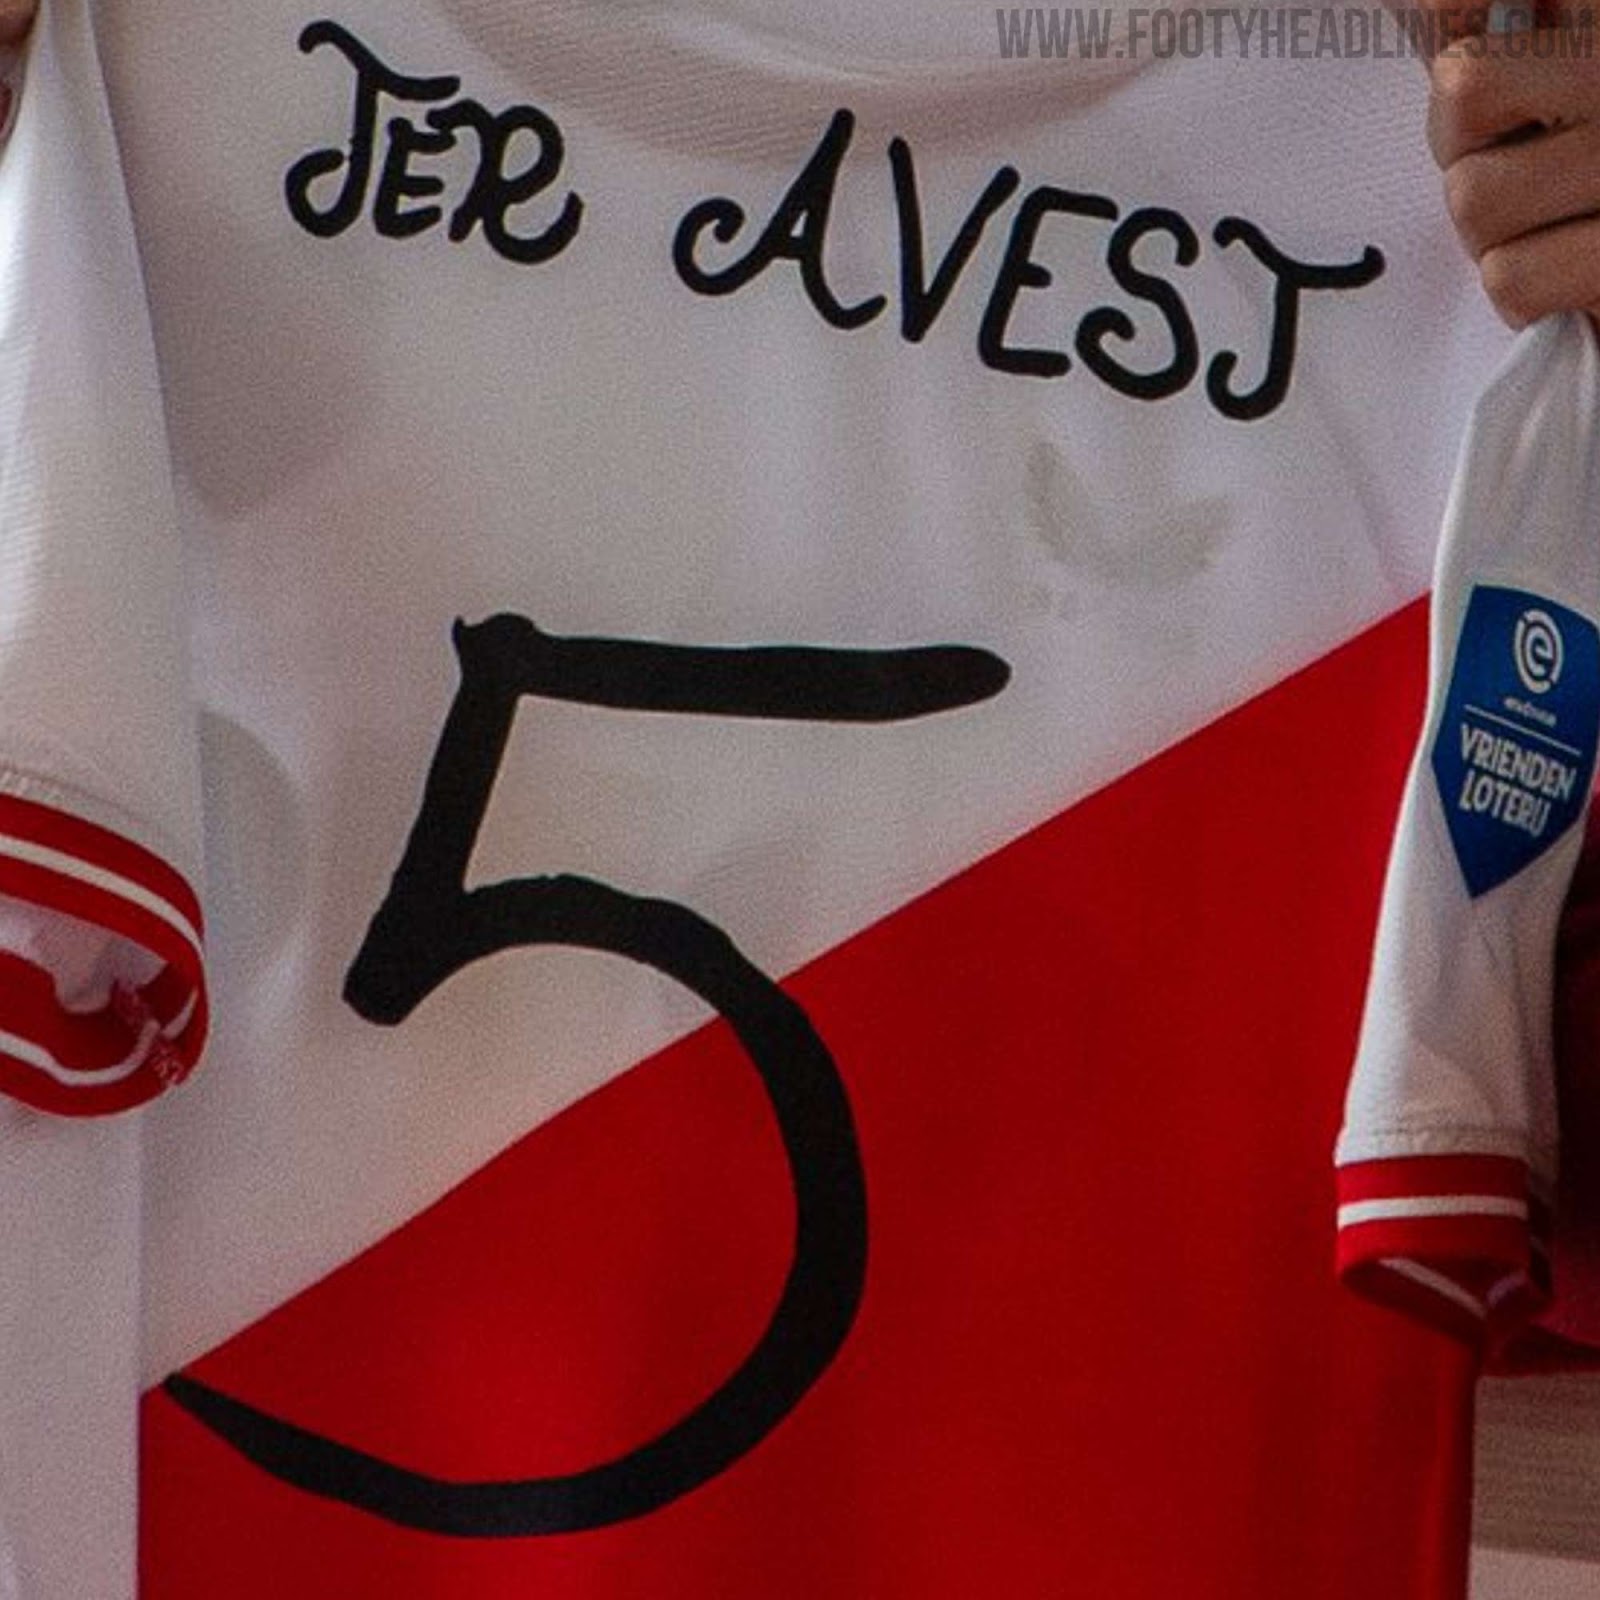 Utrecht to Wear Kits With Hand-Drawn Names & Numbers - Footy Headlines